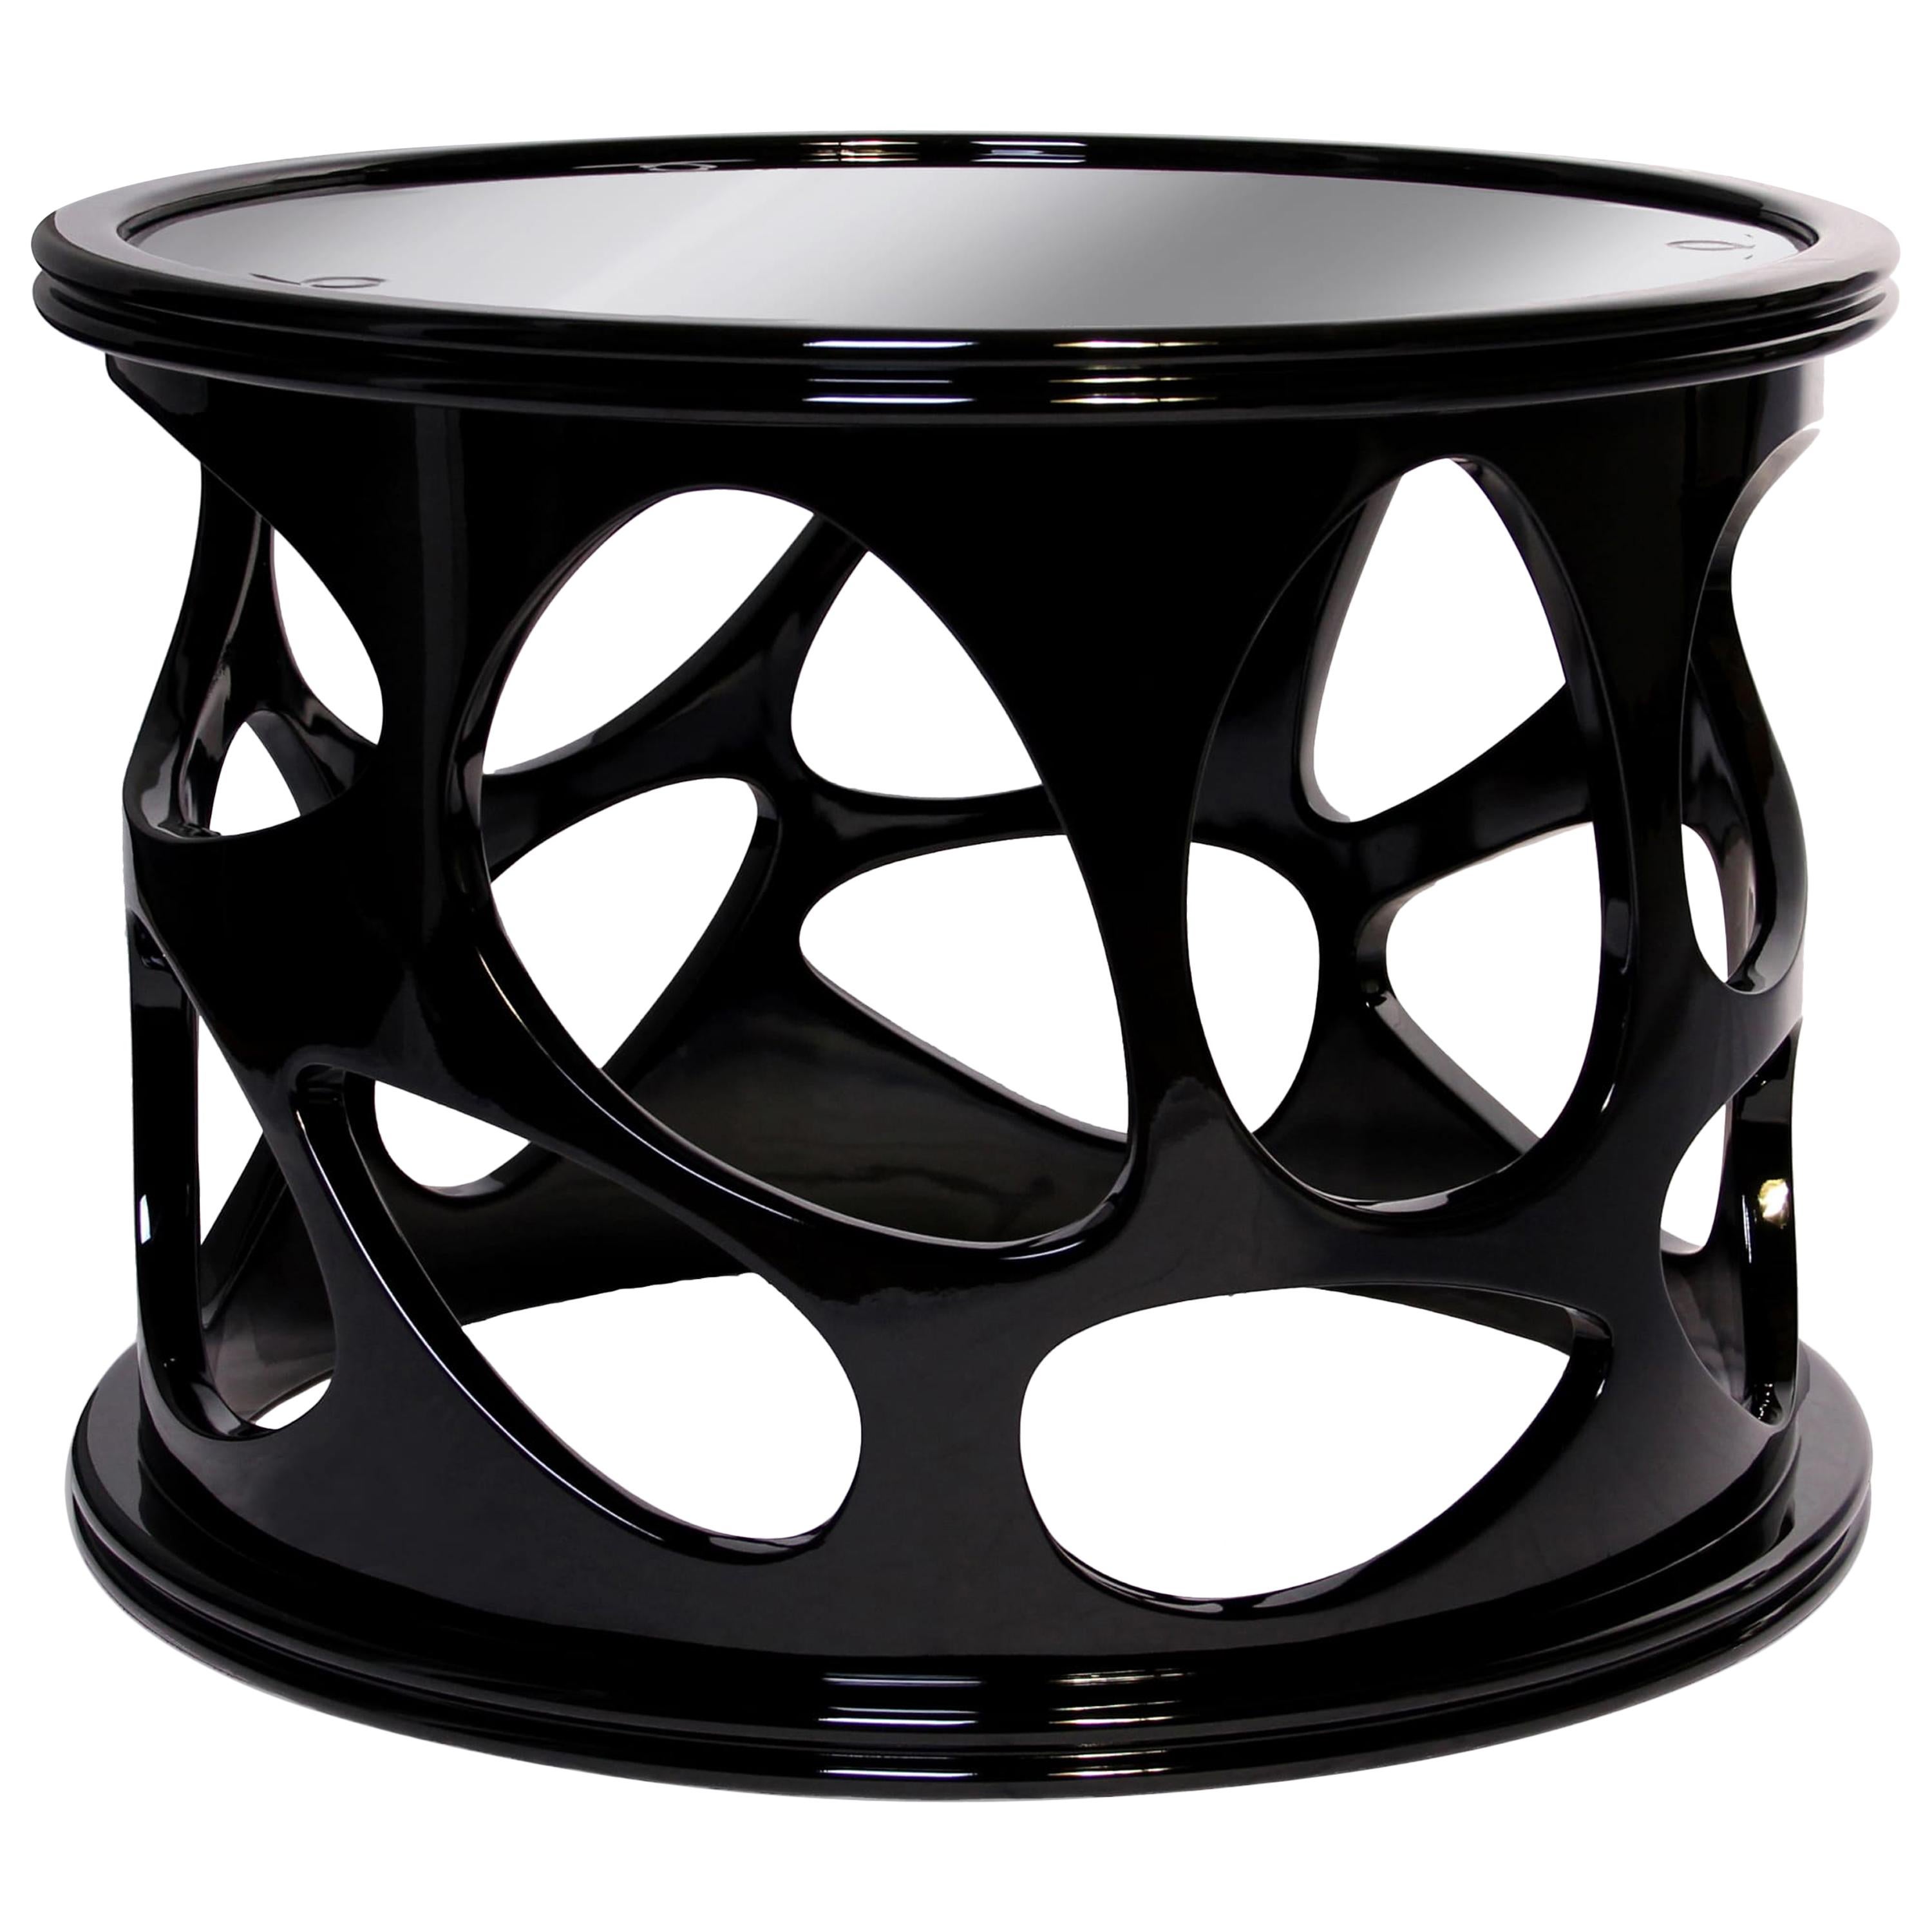 Caos Side Table in Black Lacquer Gloss For Sale